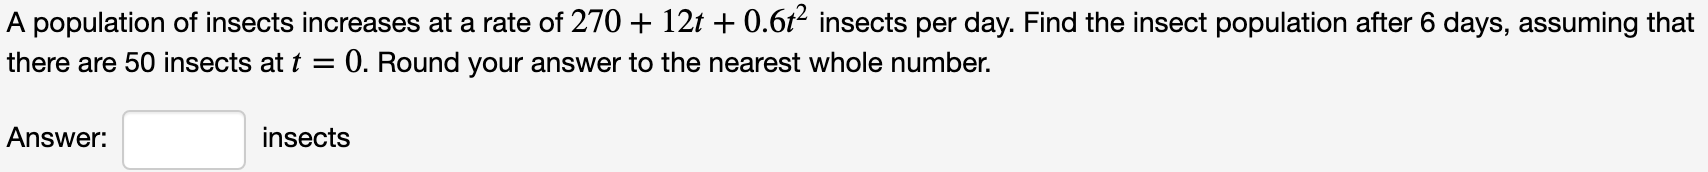 A population of insects increases at a rate of 270 + 12t + 0.6t² insects per day. Find the insect population after 6 days, assuming that
there are 50 insects at t = 0. Round your answer to the nearest whole number.
Answer:
insects
